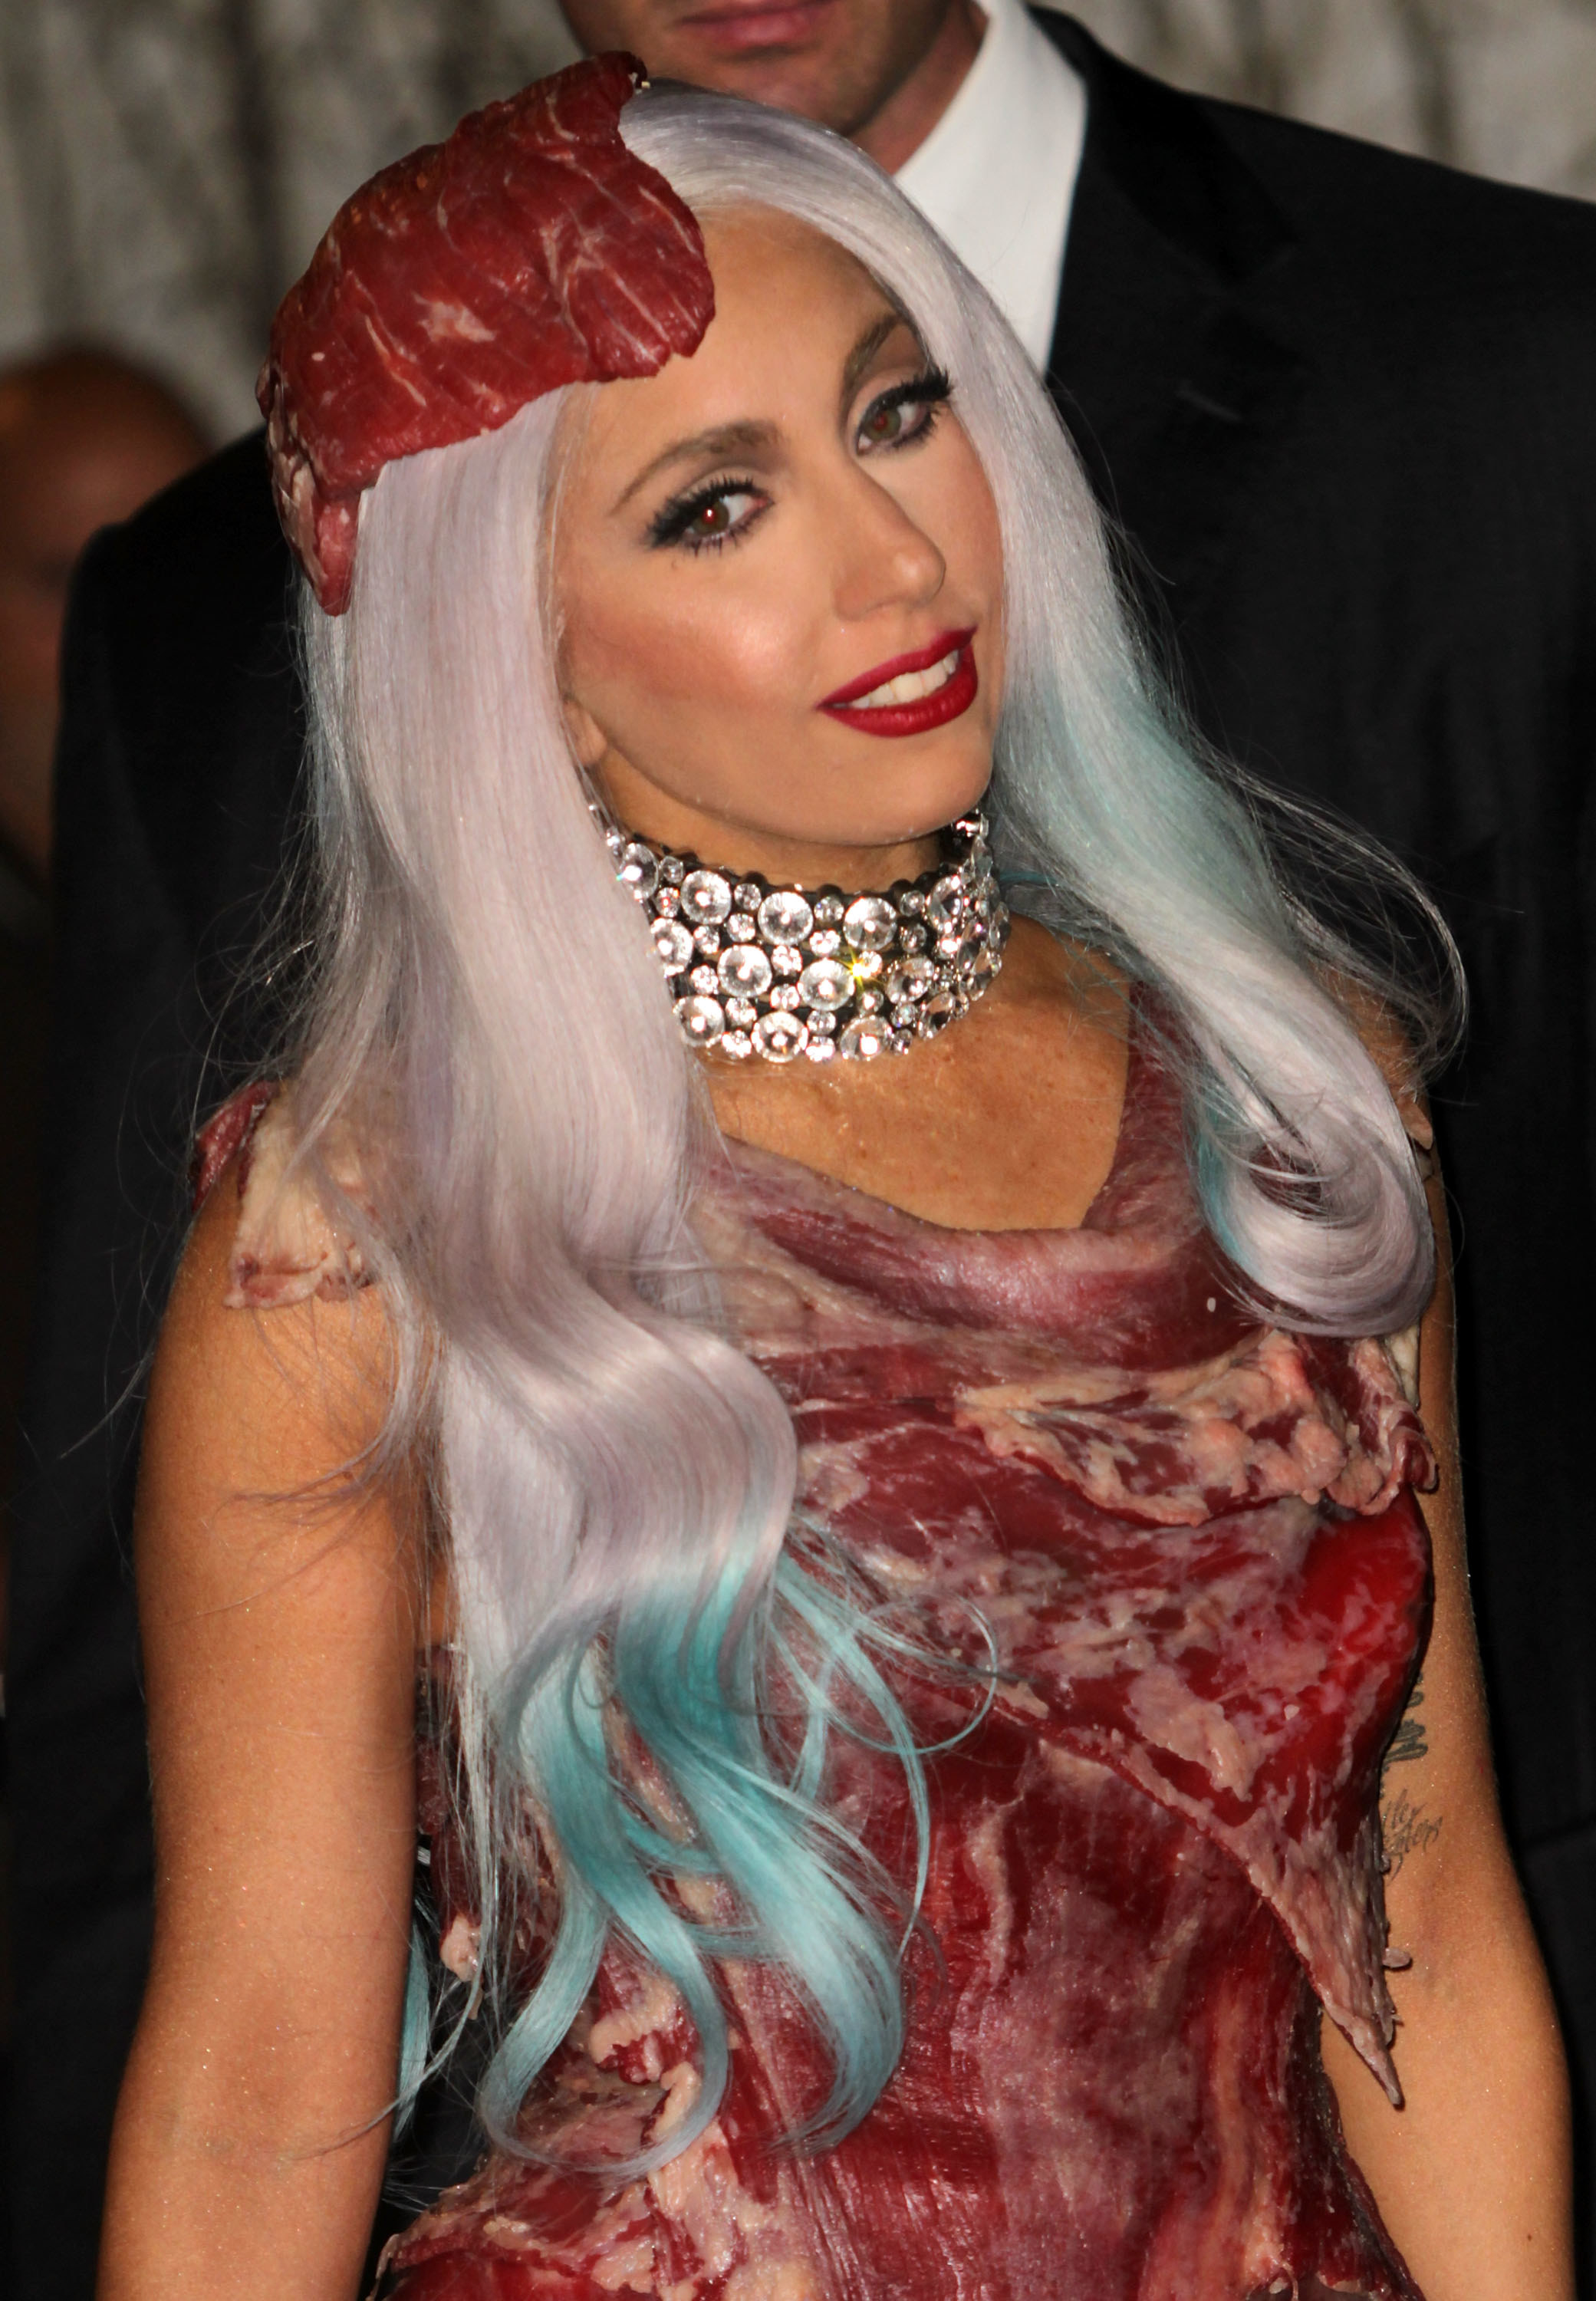 A close up of Gaga in the dress